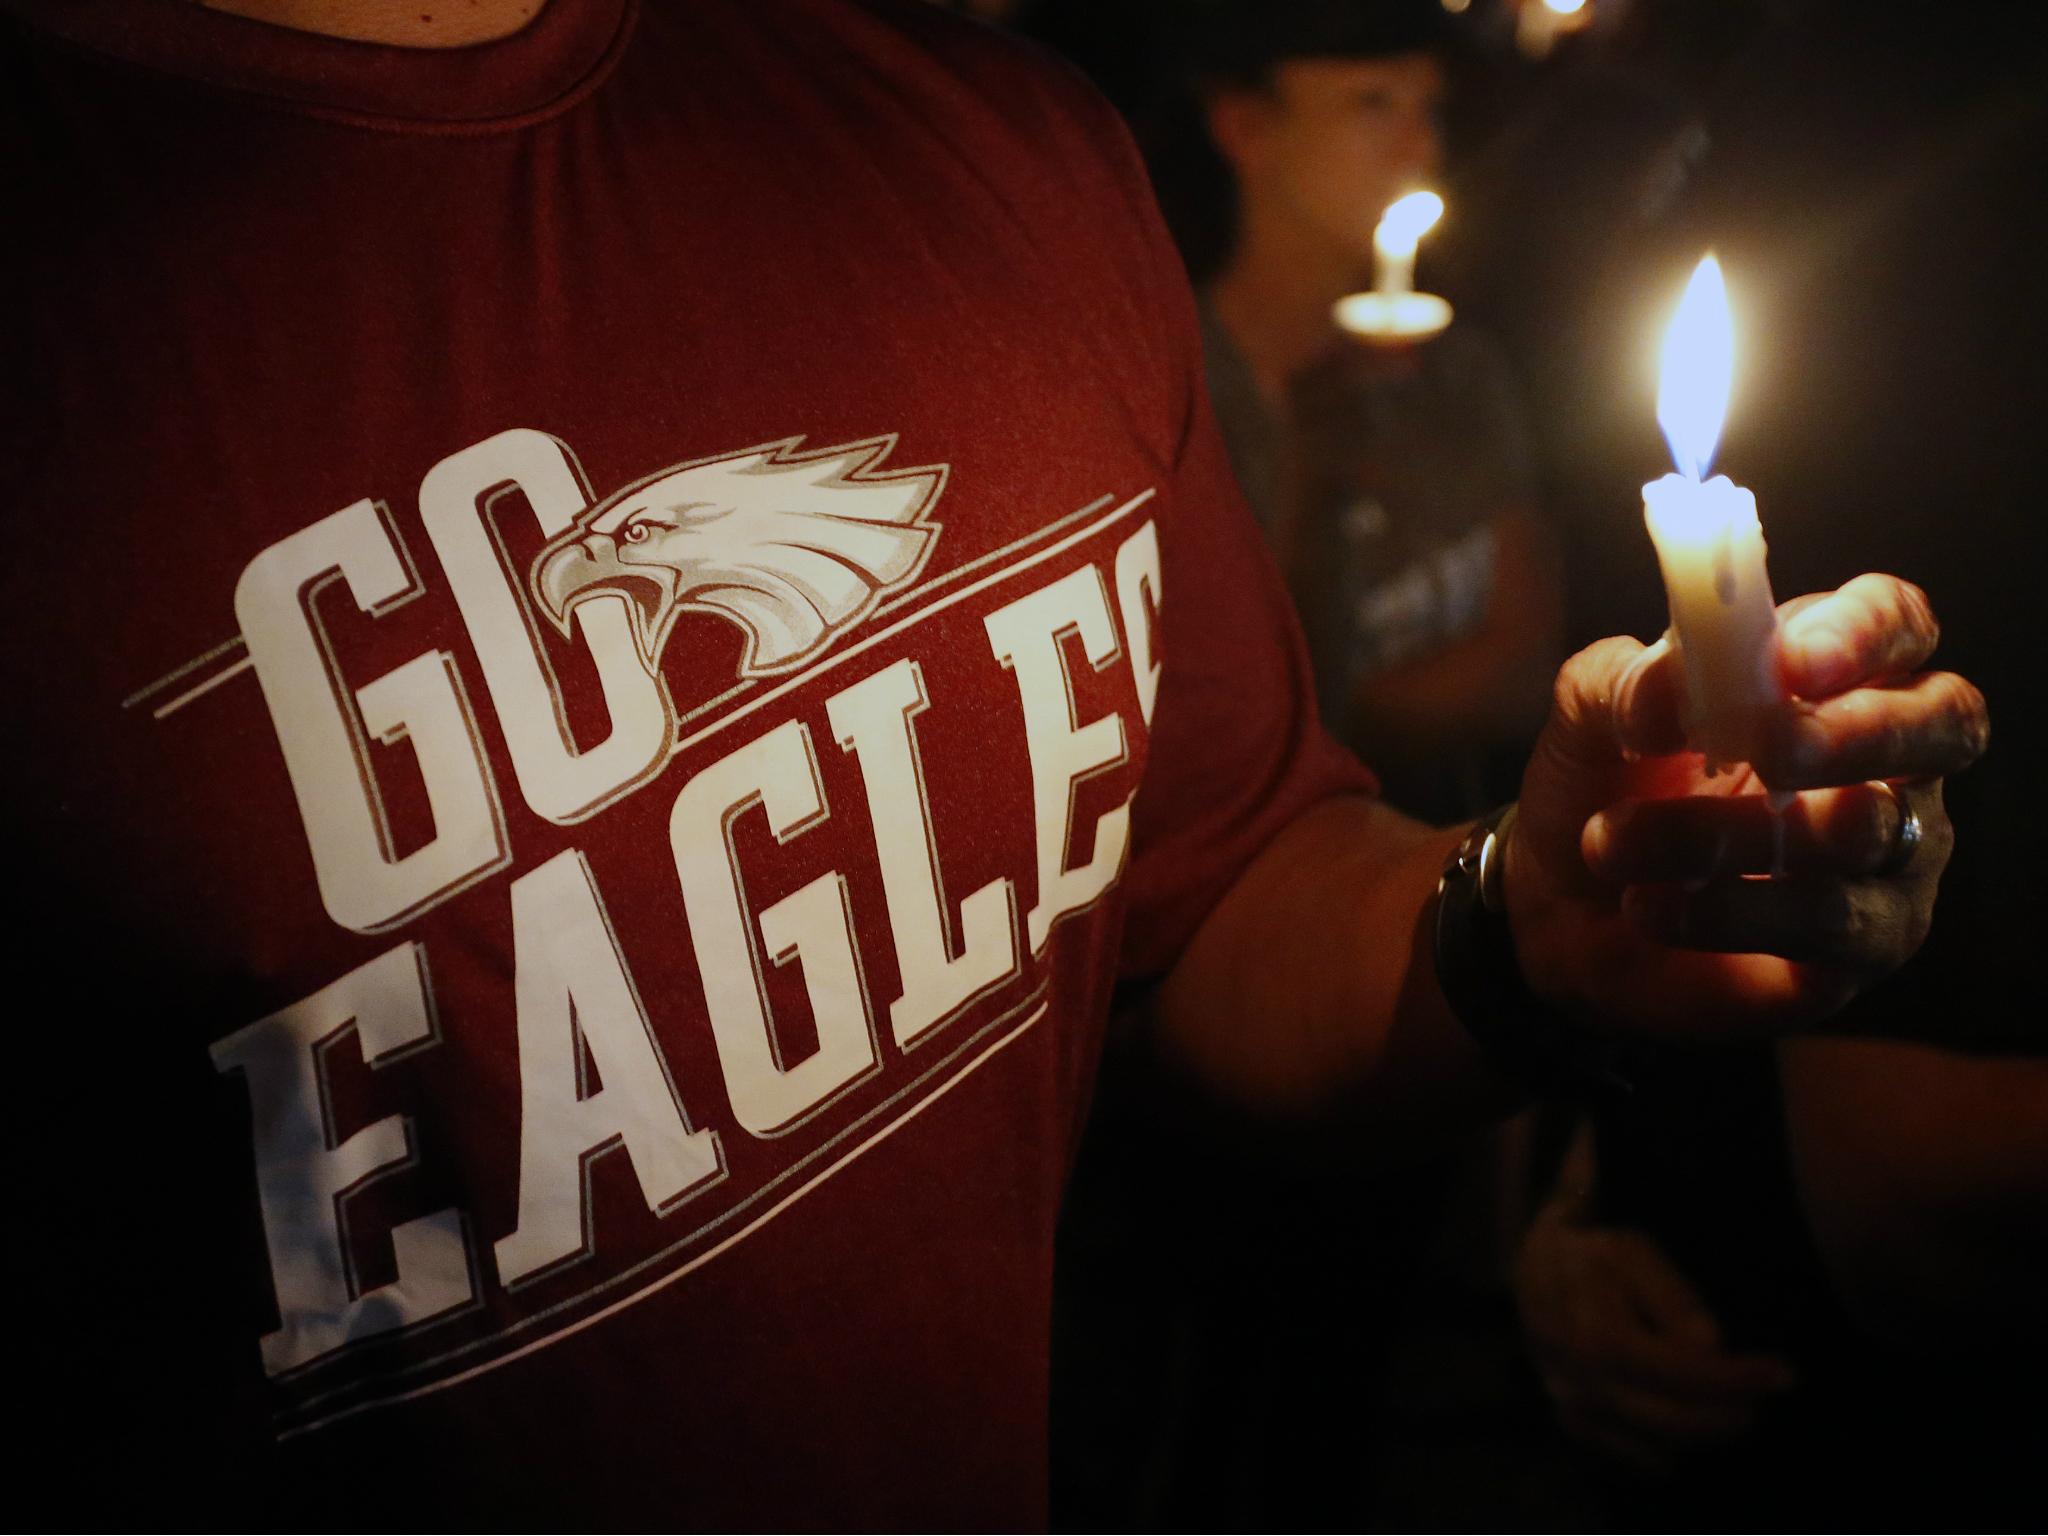 Thousands of mourners attend a candlelight vigil for victims of the Marjory Stoneman Douglas High School shooting in Parkland, Florida on 15 February 2018